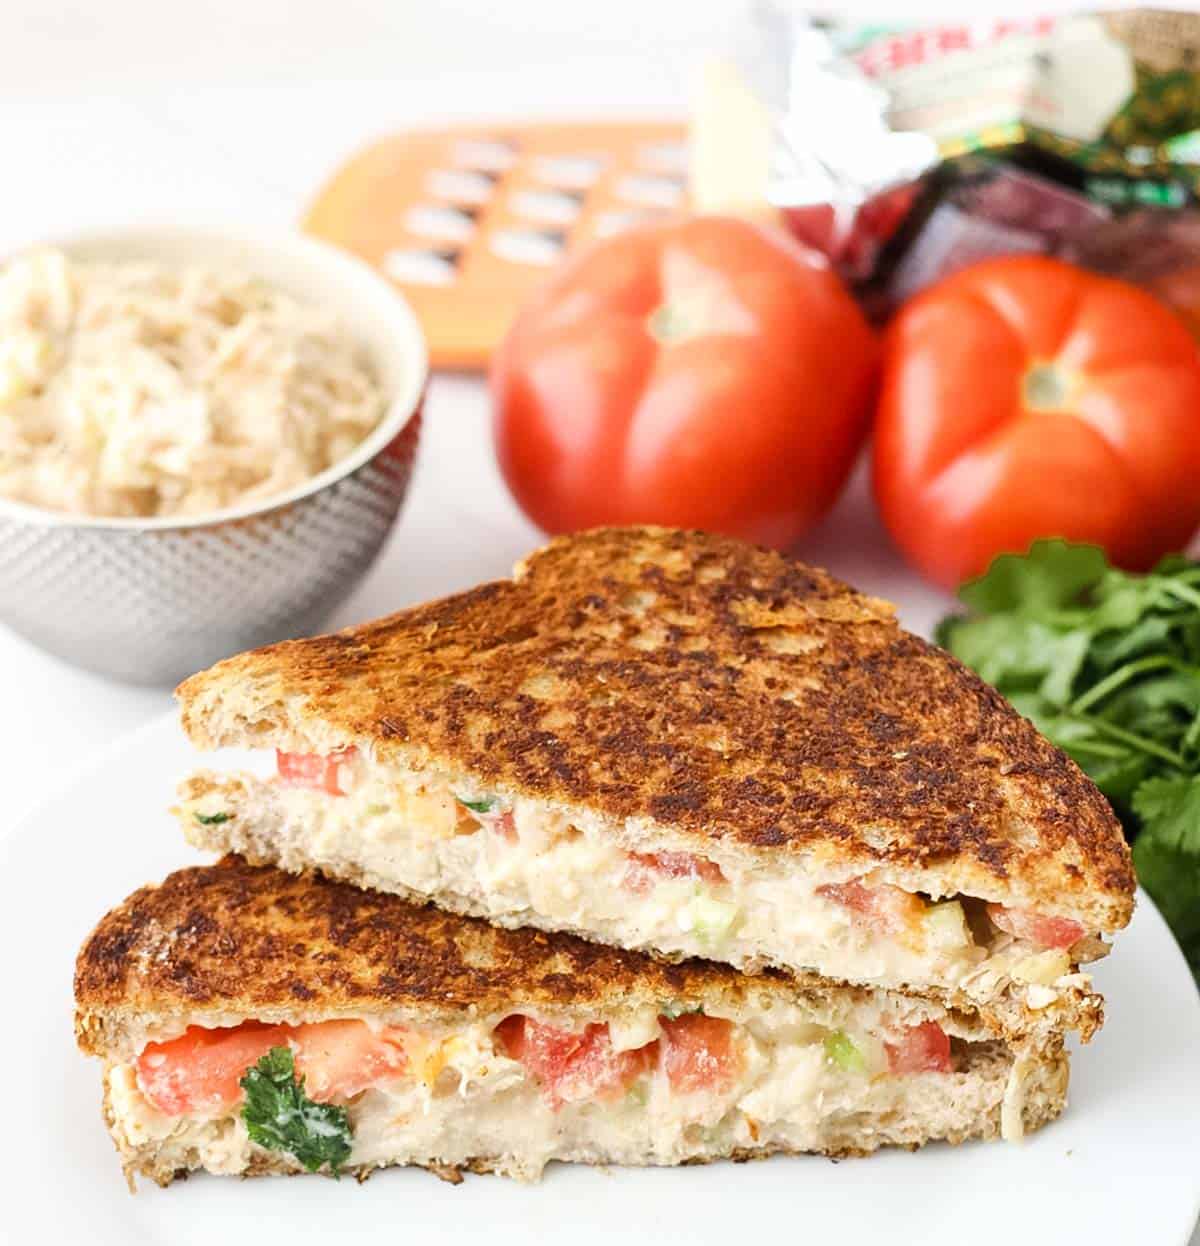 stacked chicken salad melt sandwich surrounded by tomatoes, parsley, and a bowl of chicken salad.